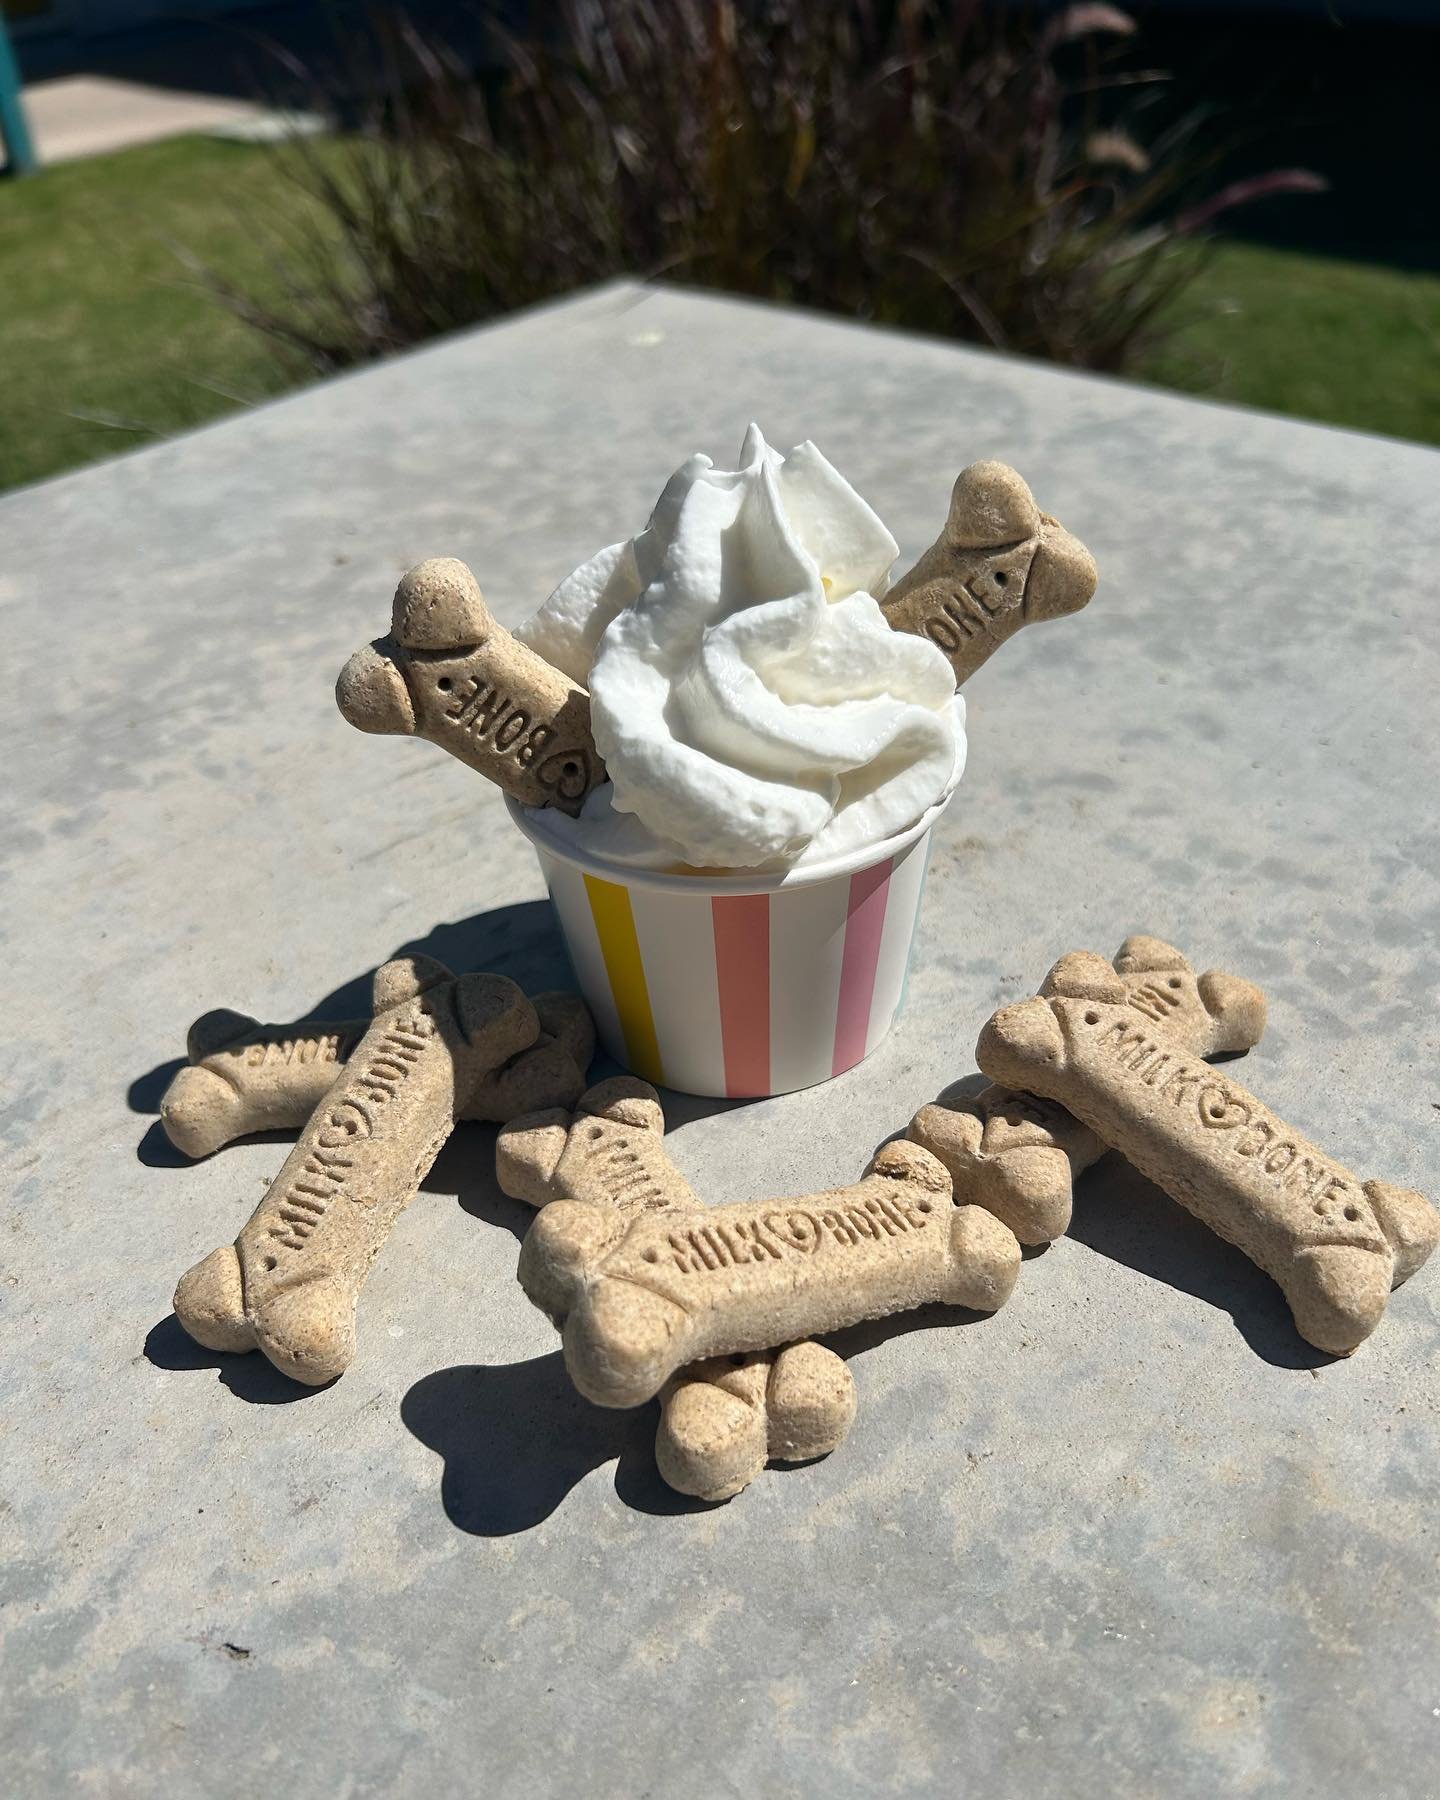 Happy National Pet Day! 

Give your furry pet a sweet treat today located in our leasing office today! We are offering Pup cups with whip cream and dog treats. Or we could give out cups of whip cream! Come while supplies last!